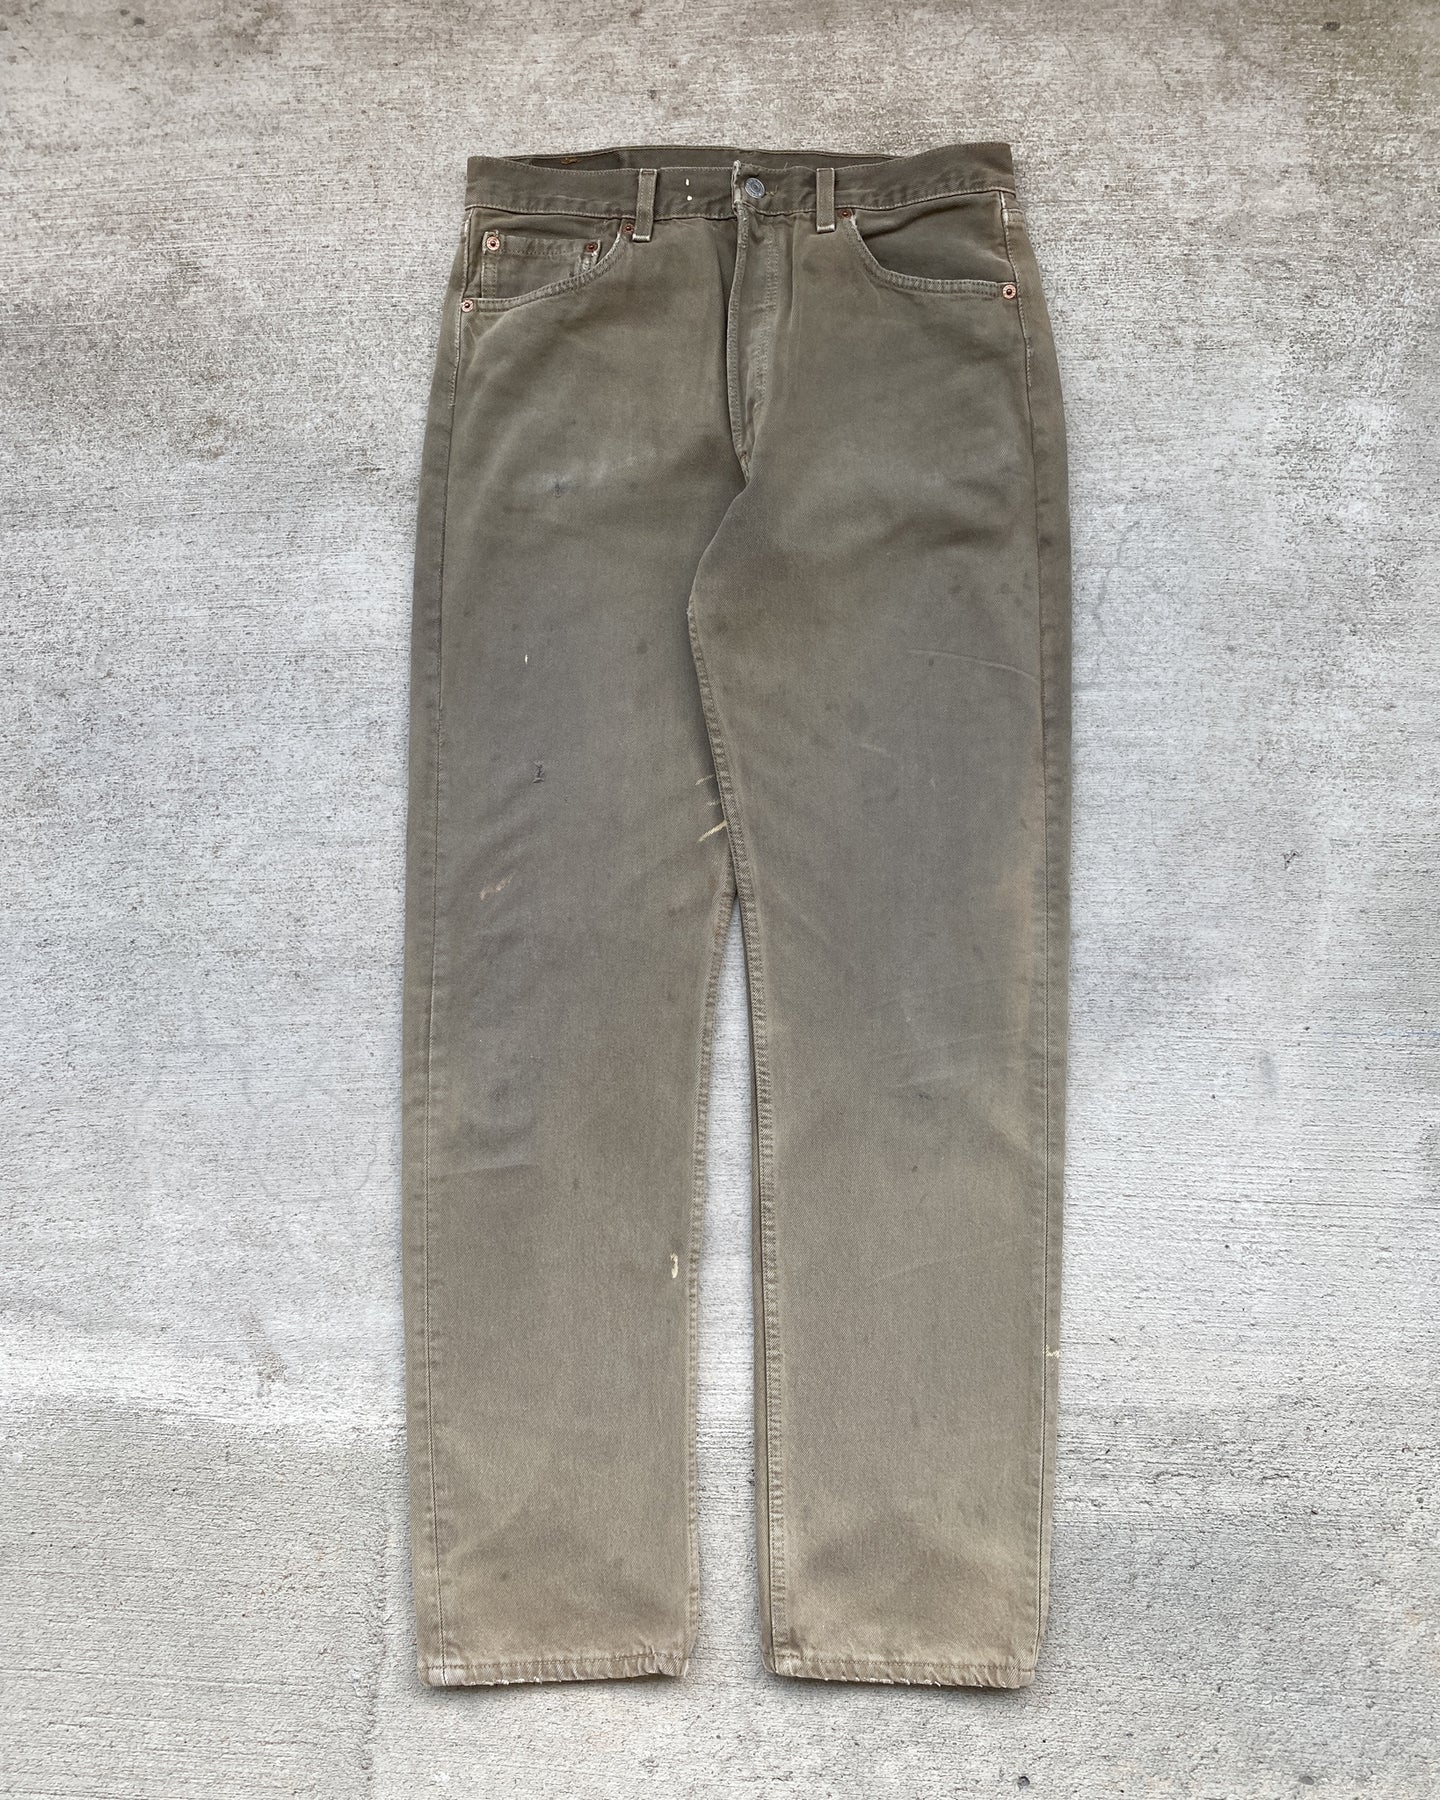 1990s Levi's Distressed Olive 501 - Size 32 x 33